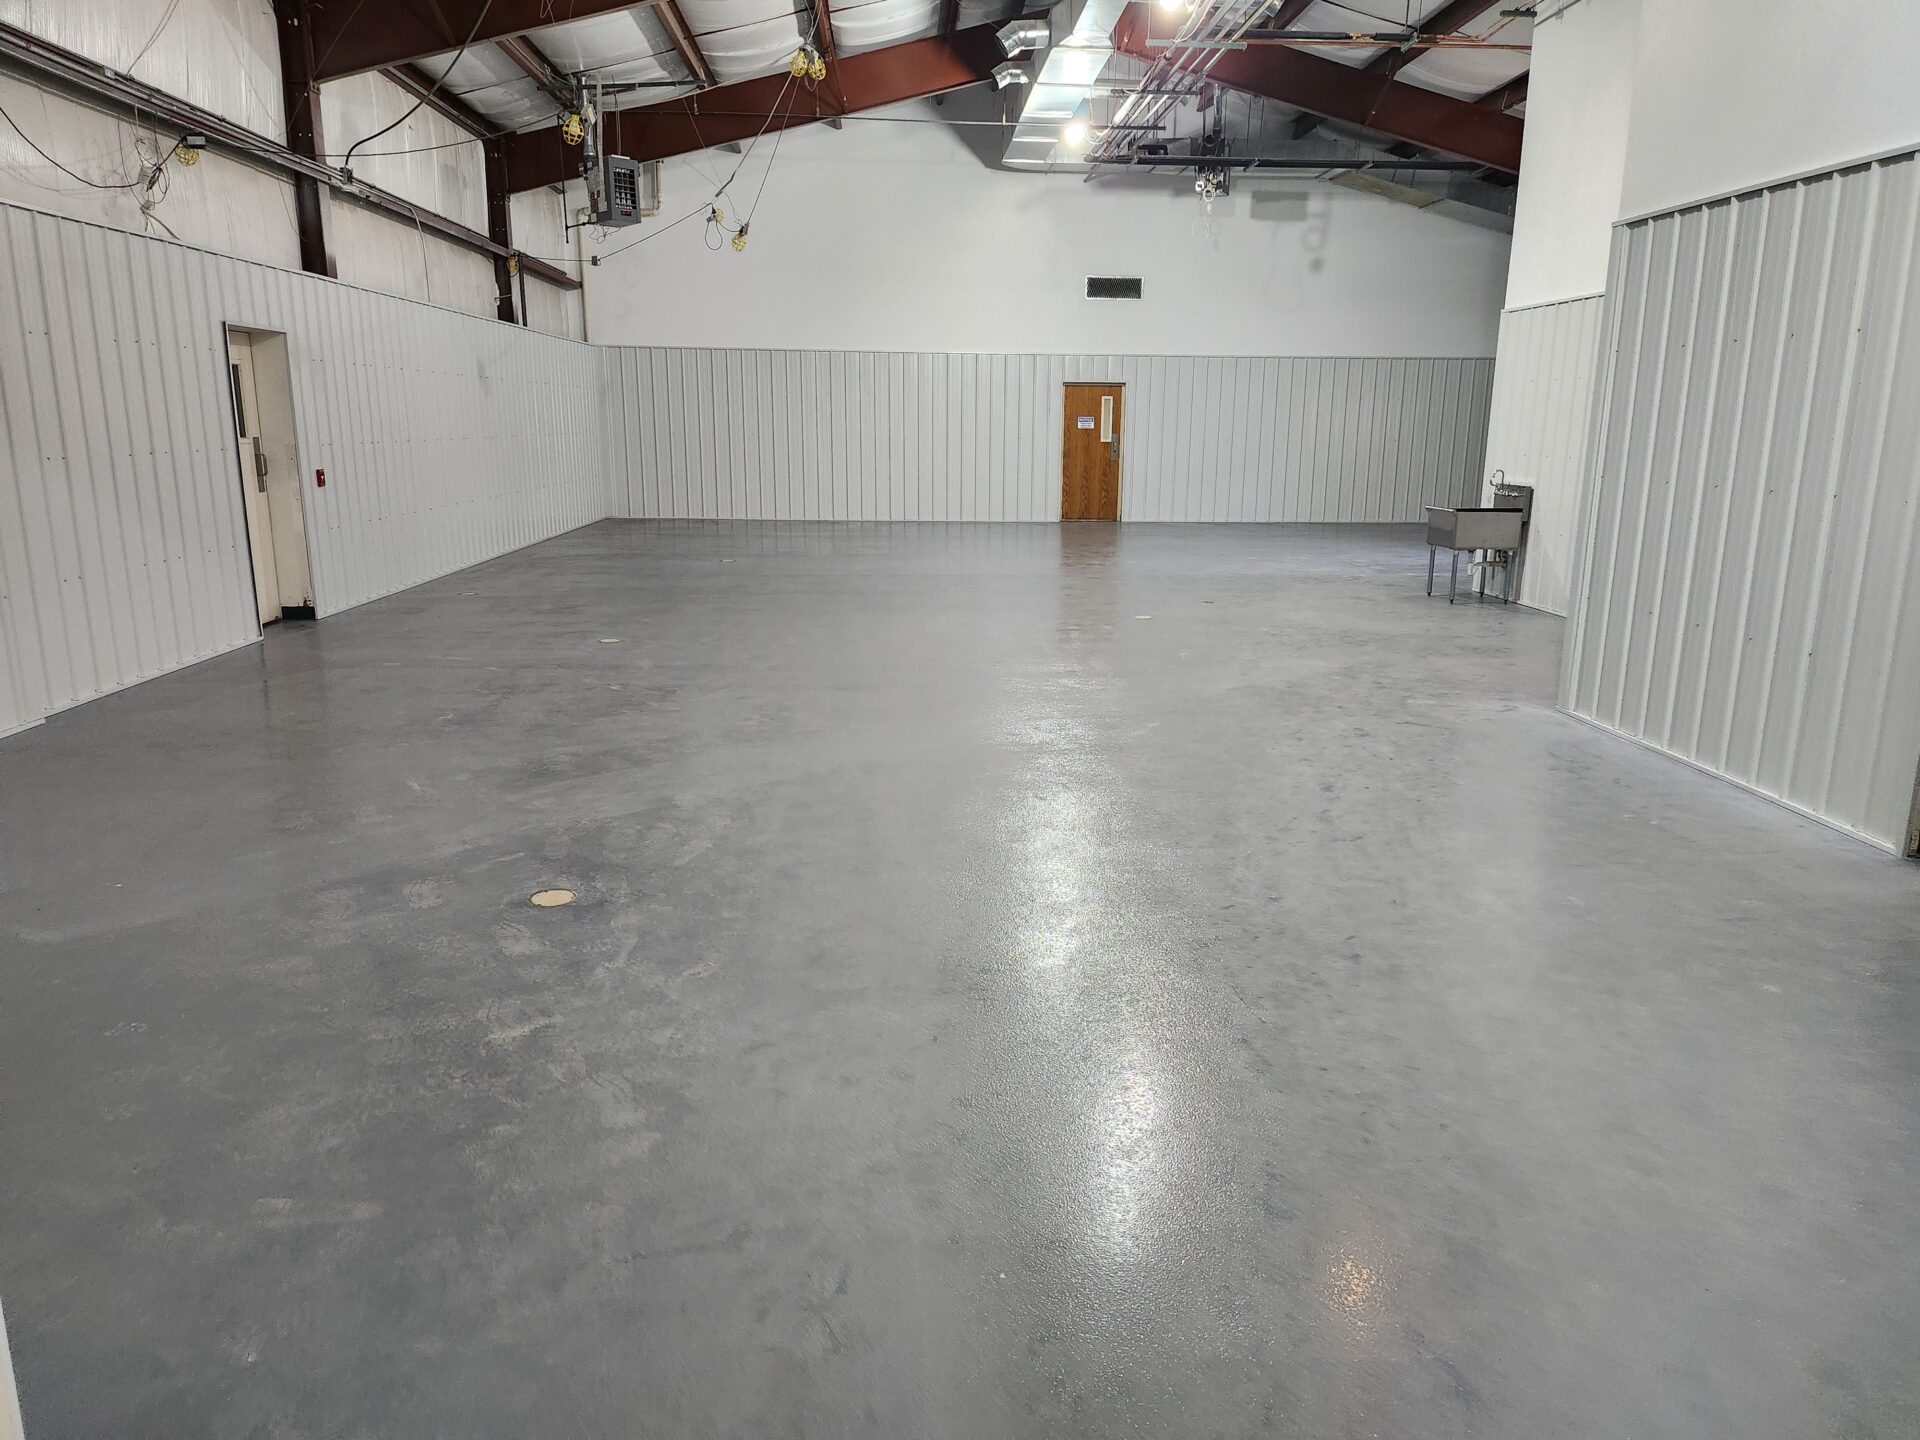 Spacious industrial warehouse interior with grey flooring.